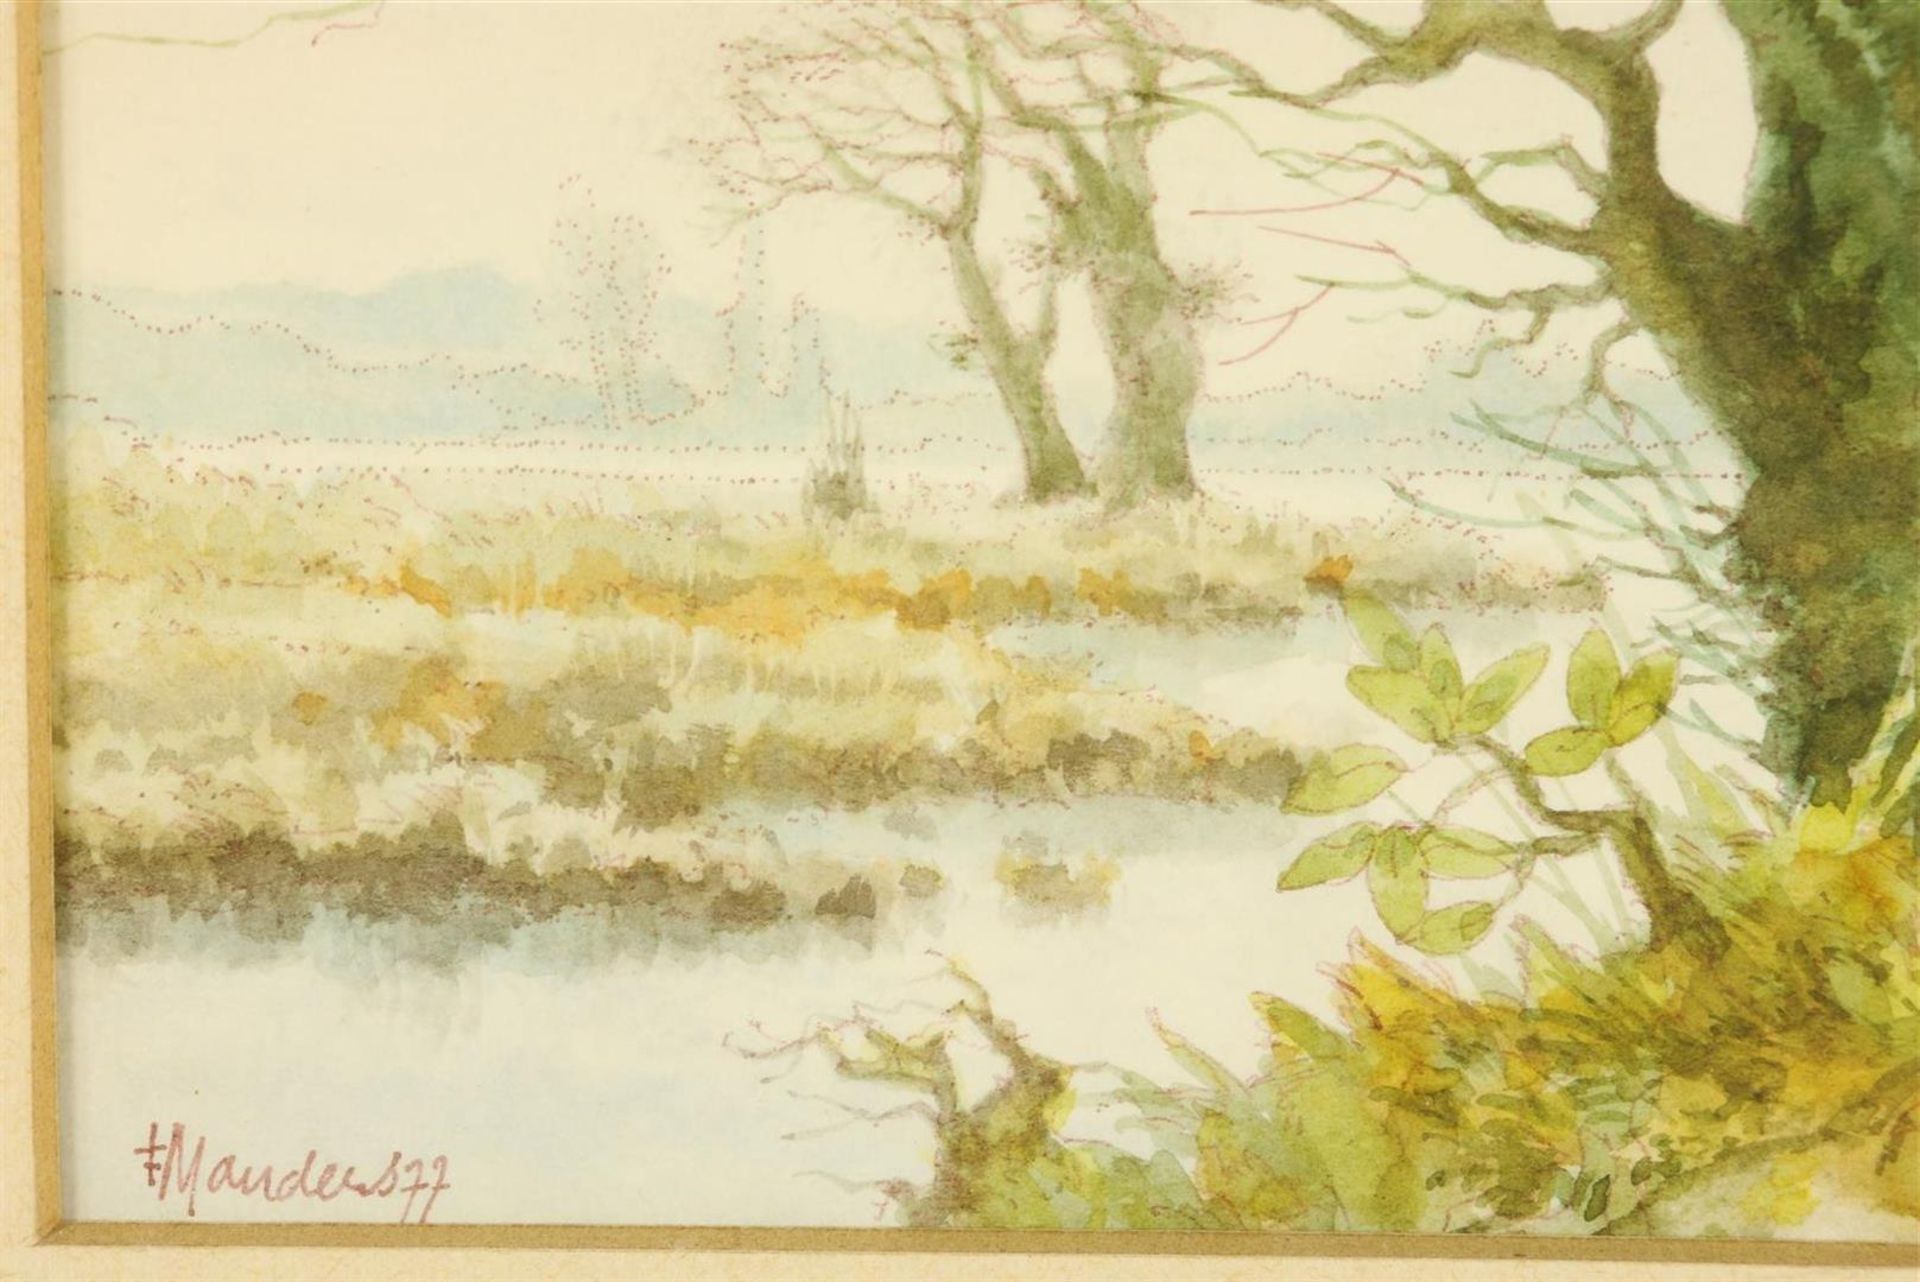 Frans Manders (1939-) Pollard willow in Dommelen, signed and dated '77 bottom left, watercolor on - Image 4 of 4